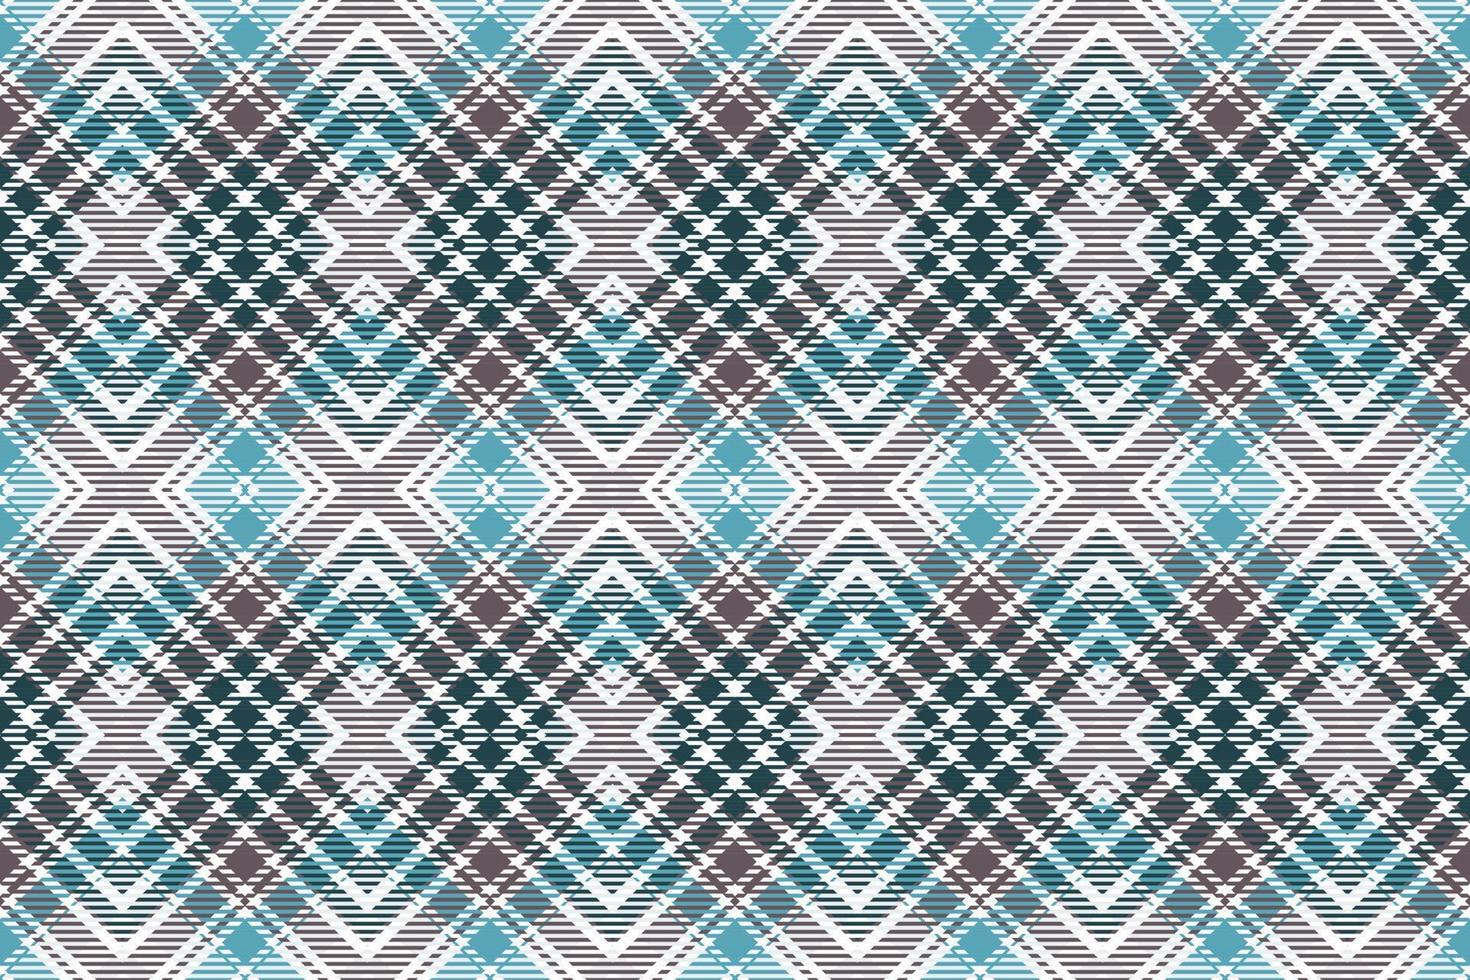 Tartan pattern seamless plaid is a patterned cloth consisting of criss crossed, horizontal and vertical bands in multiple colours.plaid Seamless For scarf,pyjamas,blanket,duvet,kilt large shawl. vector